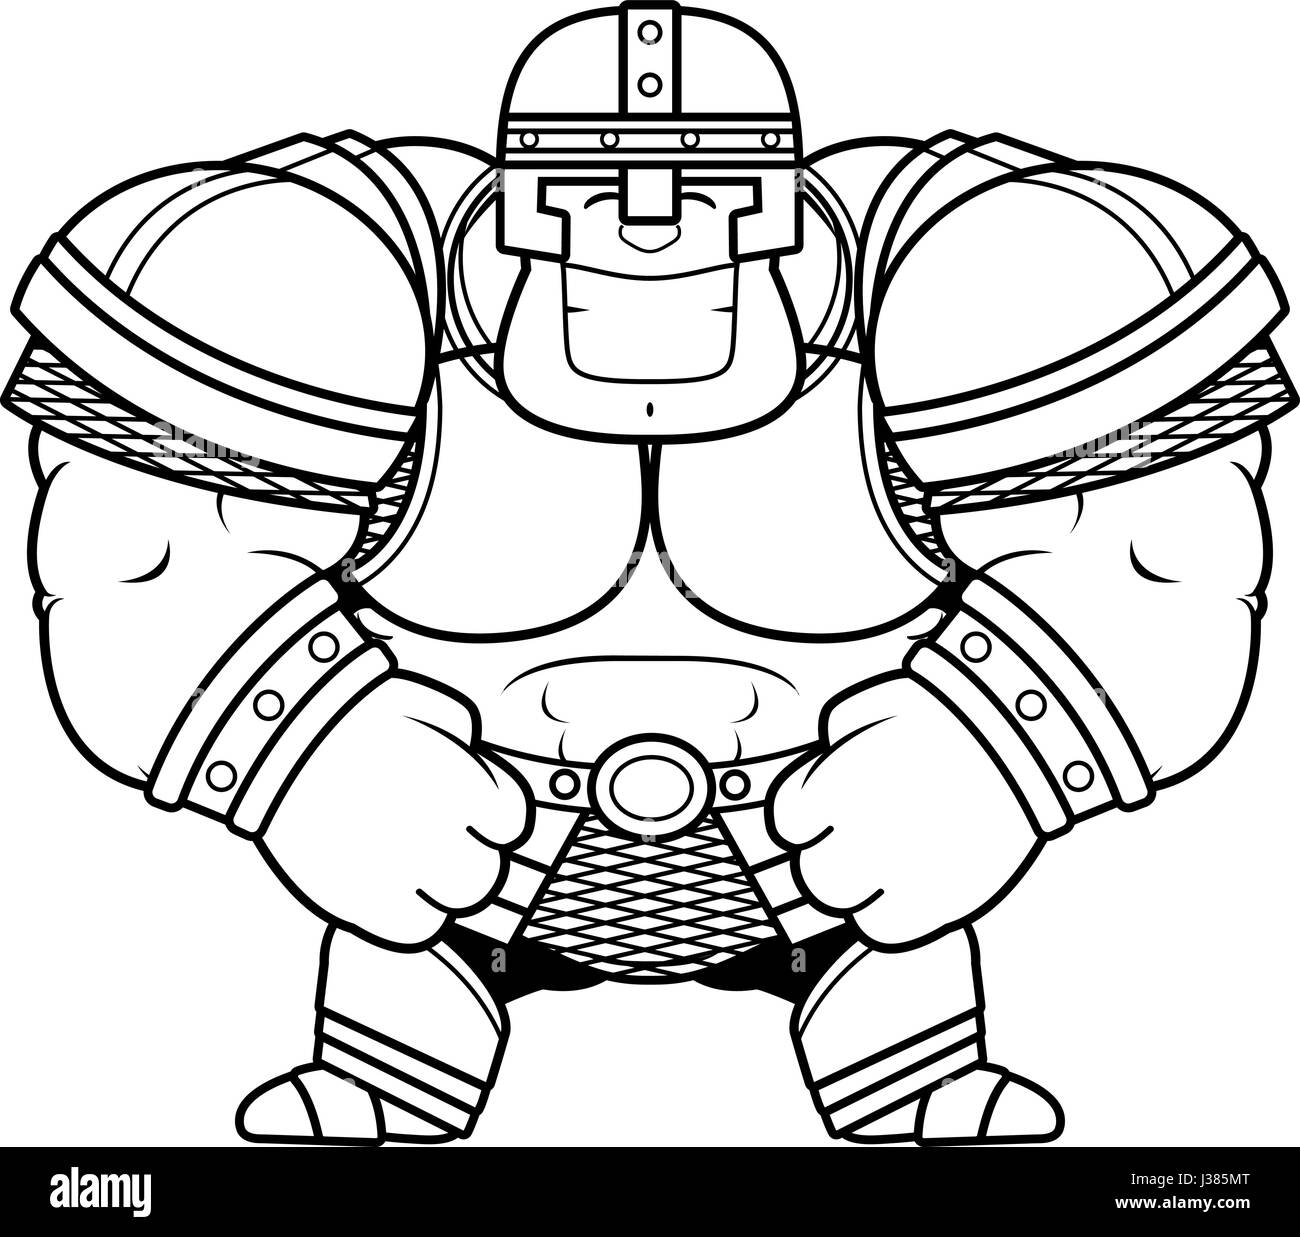 A cartoon illustration of a muscular warrior in armor smiling. Stock Vector